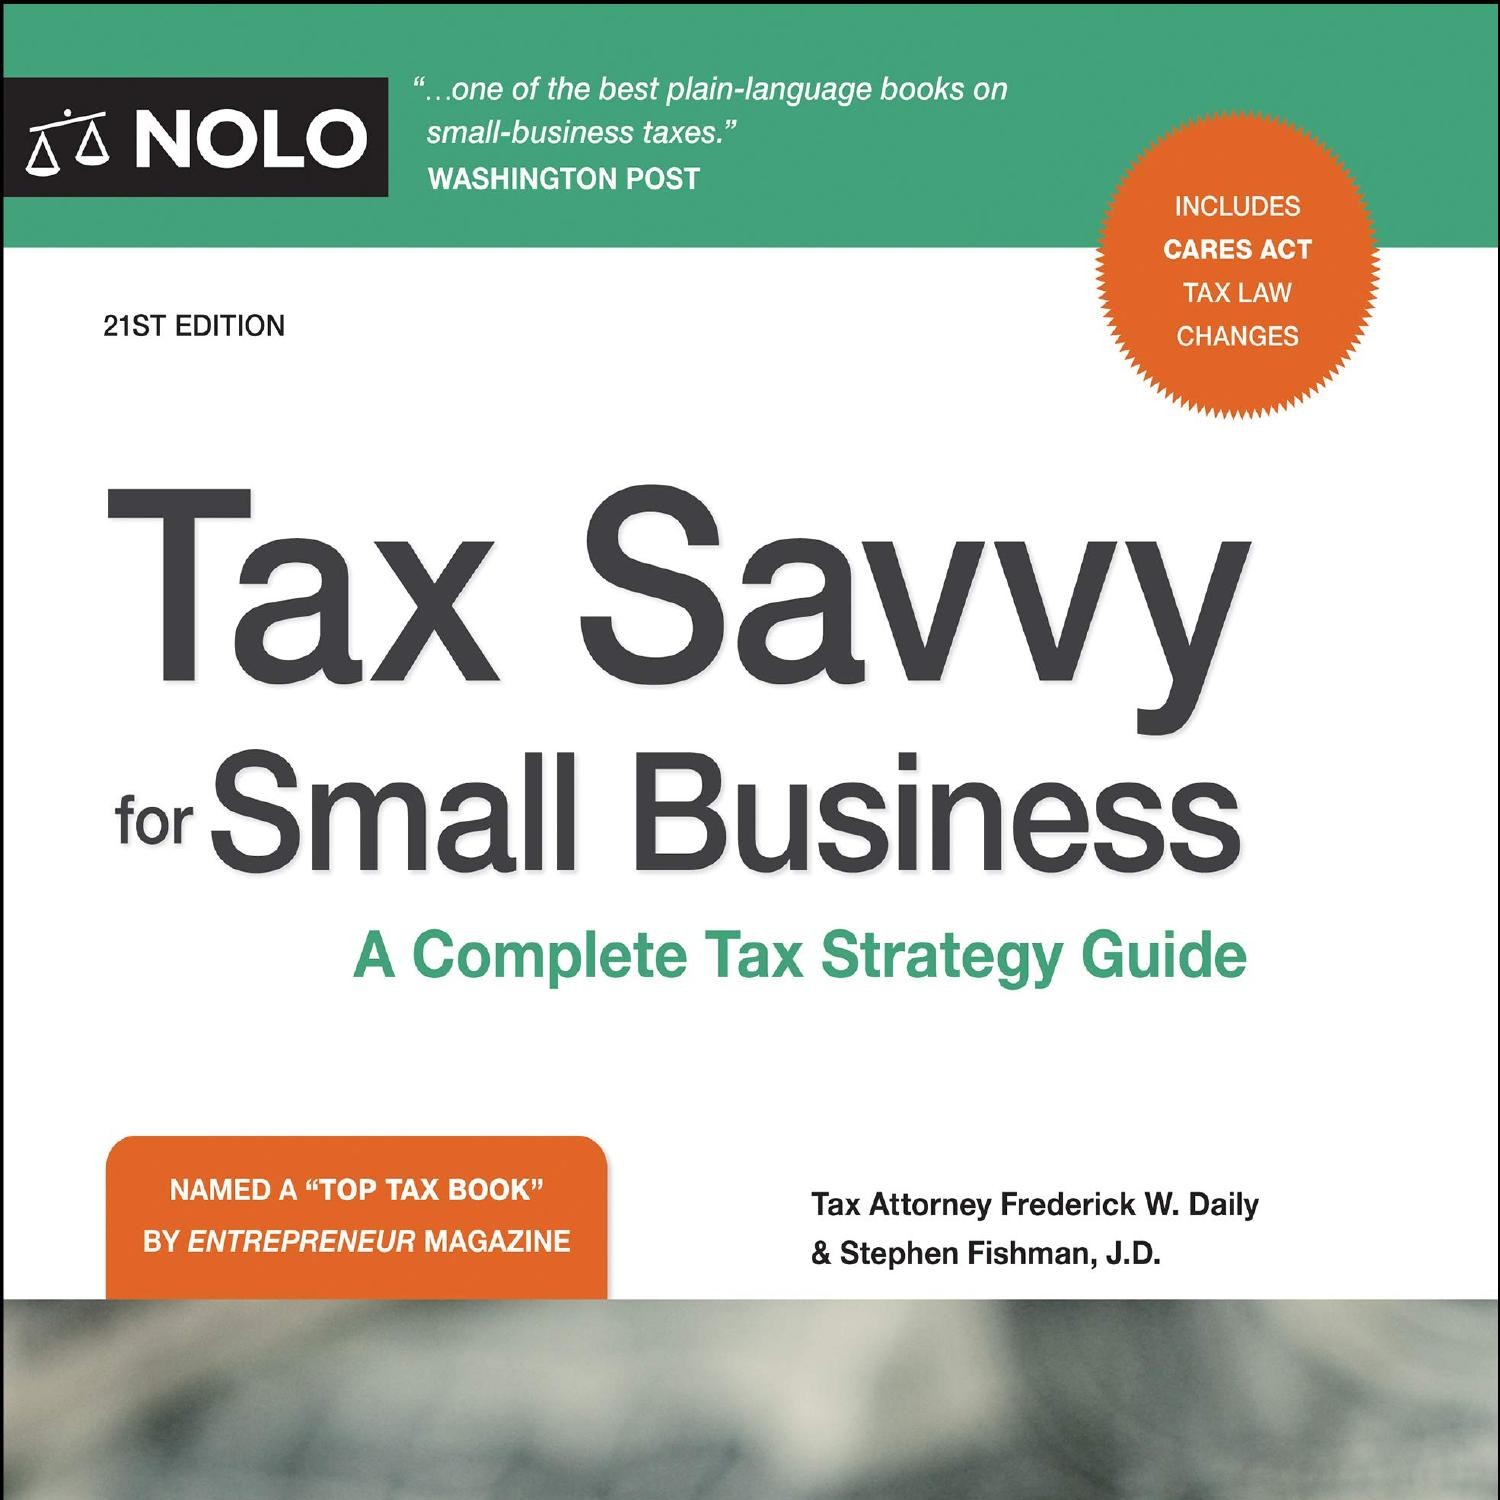 Tax Savvy for Small Business: A Complete Tax Strategy Guide [Book]